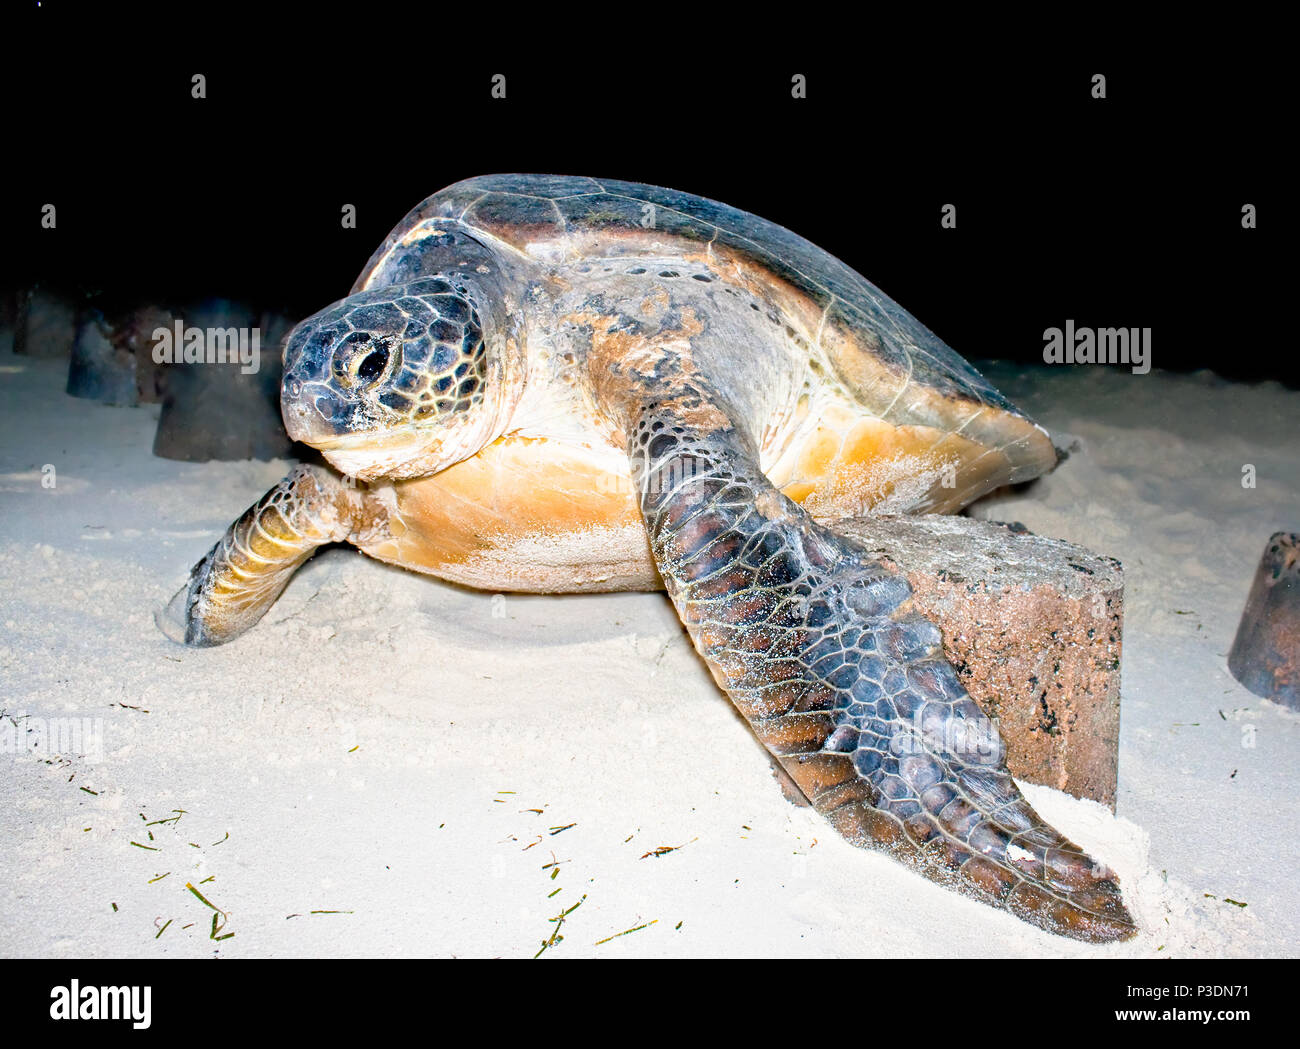 Loggerhead Sea Turtle returning to the ocean at night. The nesting process is complete. She appears to be crying with liquid flowing from her eyes. Ag Stock Photo